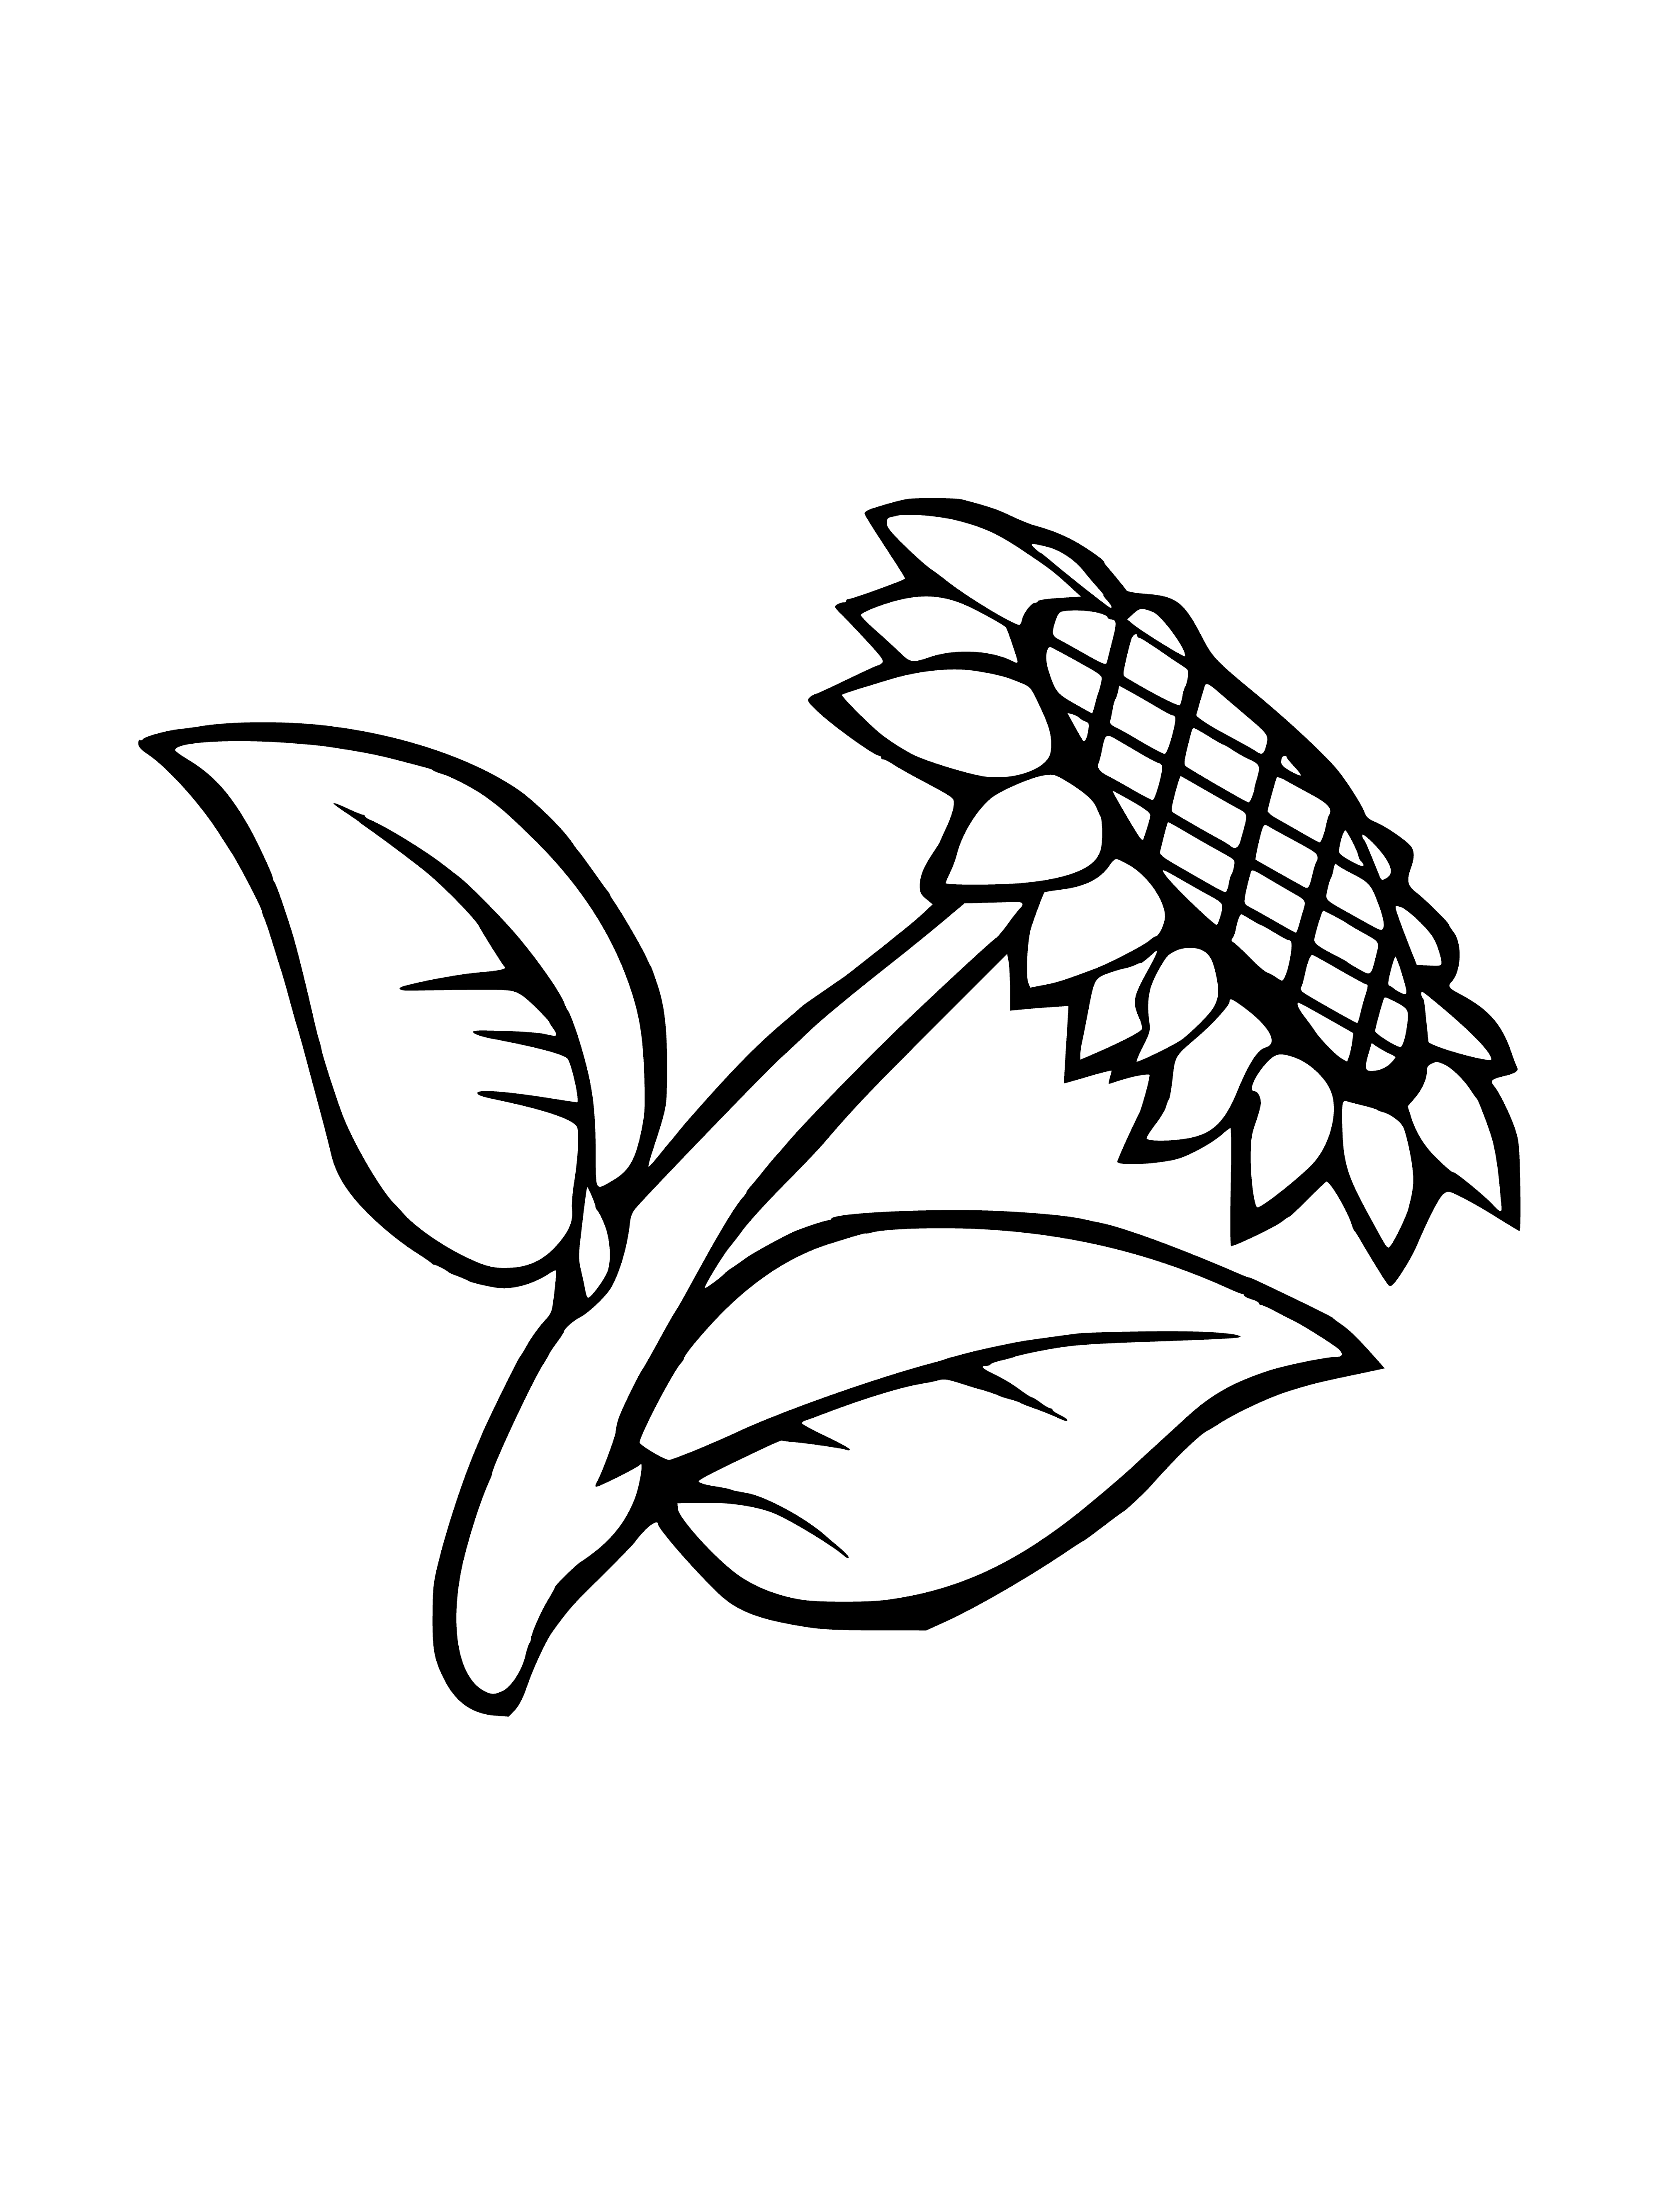 coloring page: Large yellow flower w/ green stem & leaves growing in a grassy field. Big round center w/many small yellow petals.